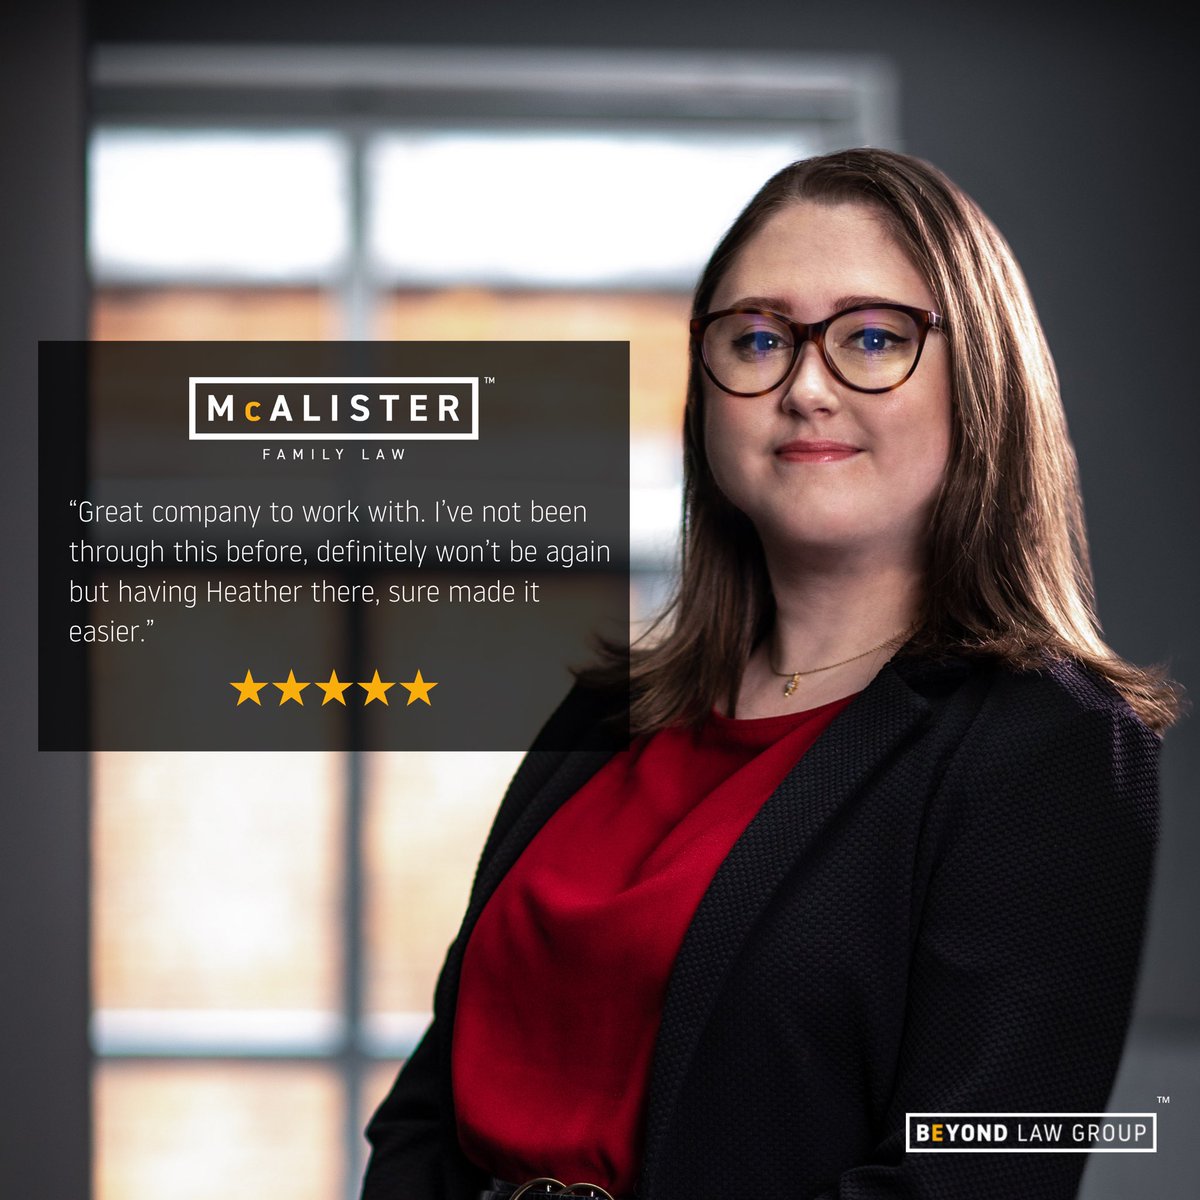 It’s Testimonial Tuesday! This week we have a lovely review for @McAlisterFamLaw’s @HeatherFamLaw! 👏 Thank you for your review and great work as always Heather! #familylaw #divorce #law #manchester #review